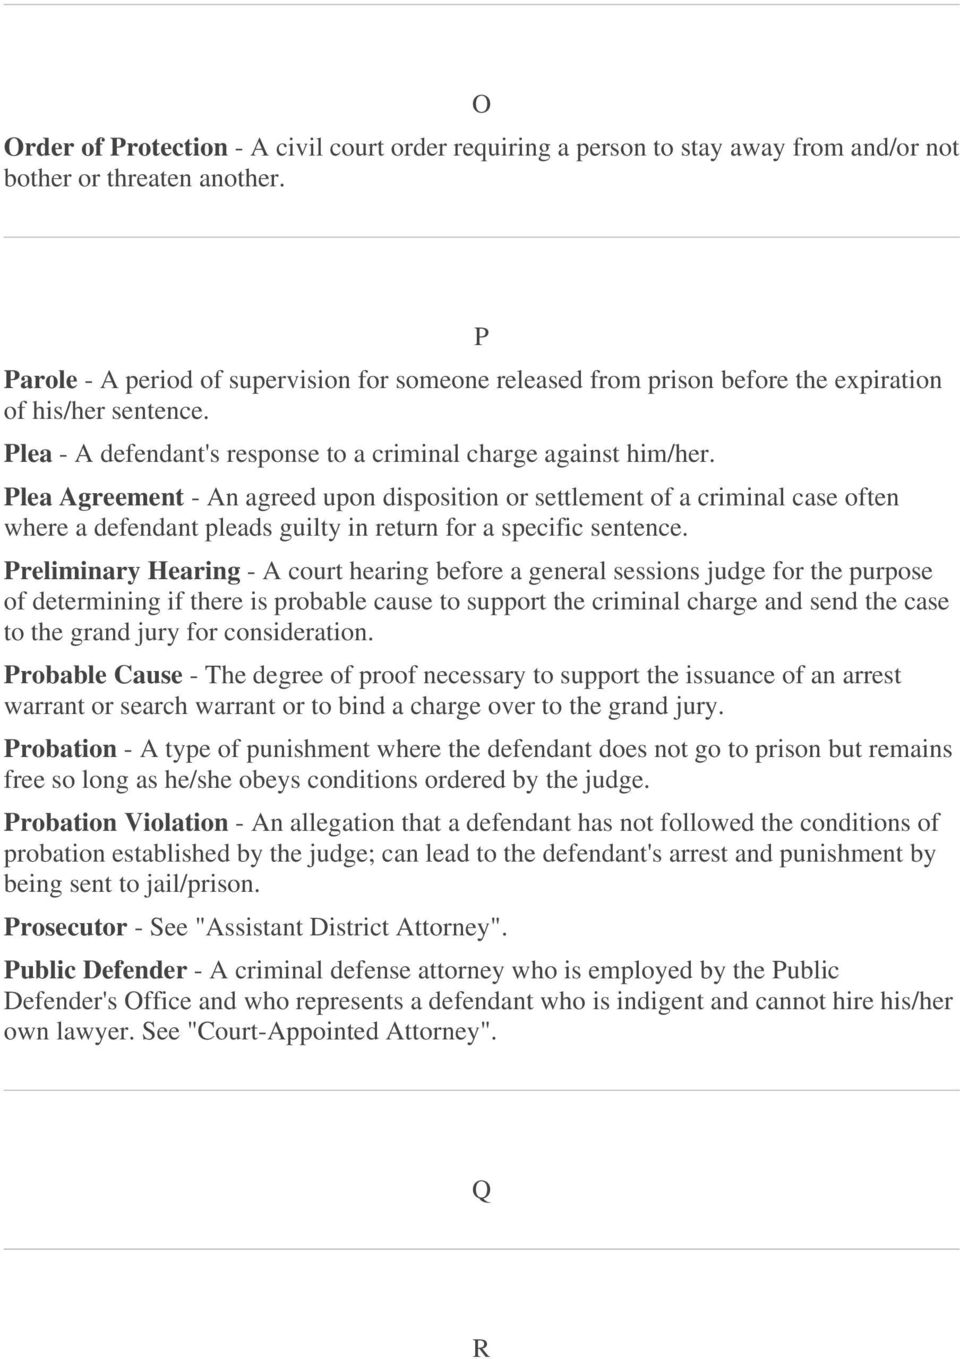 Plea Agreement - An agreed upon disposition or settlement of a criminal case often where a defendant pleads guilty in return for a specific sentence.